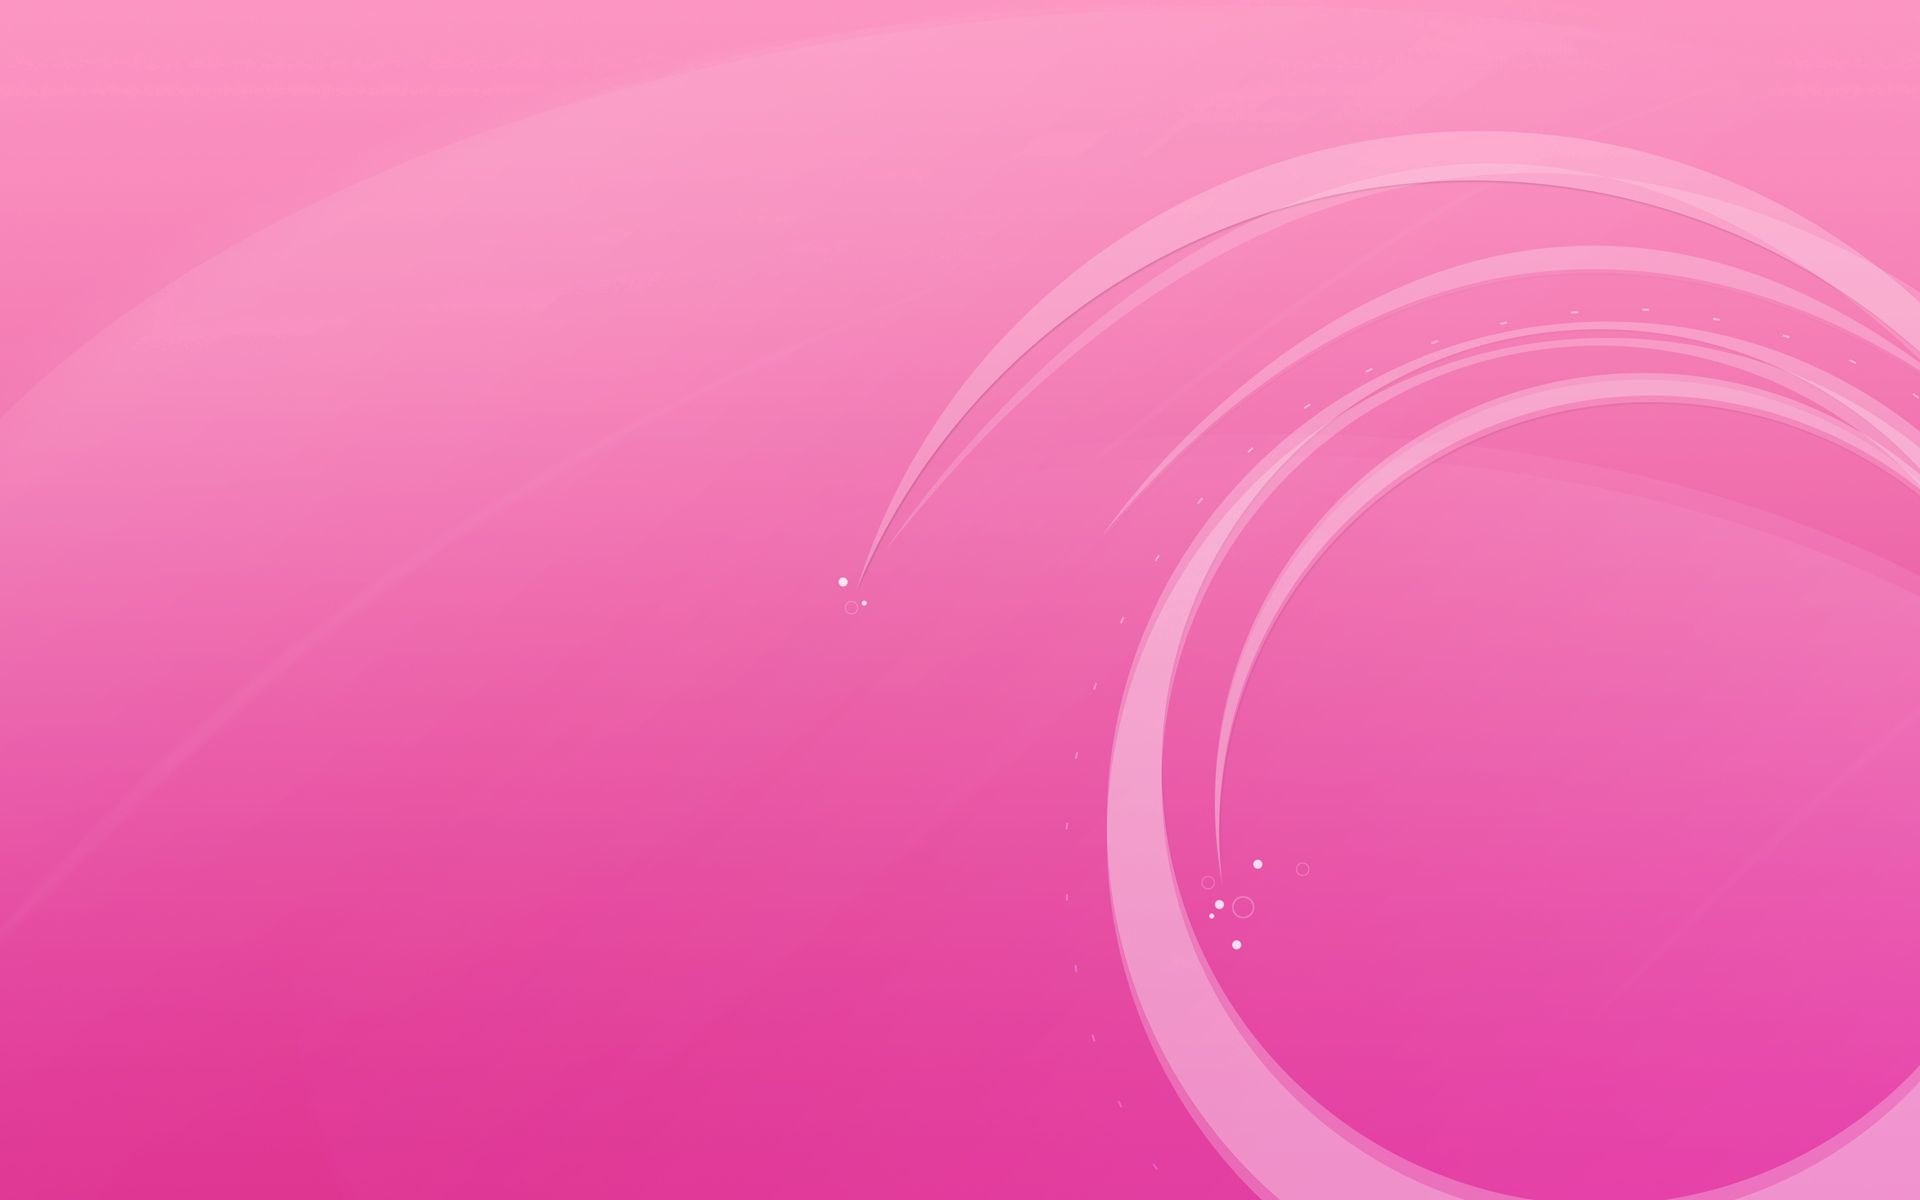 solid, abstract, background, pink, circles, lines